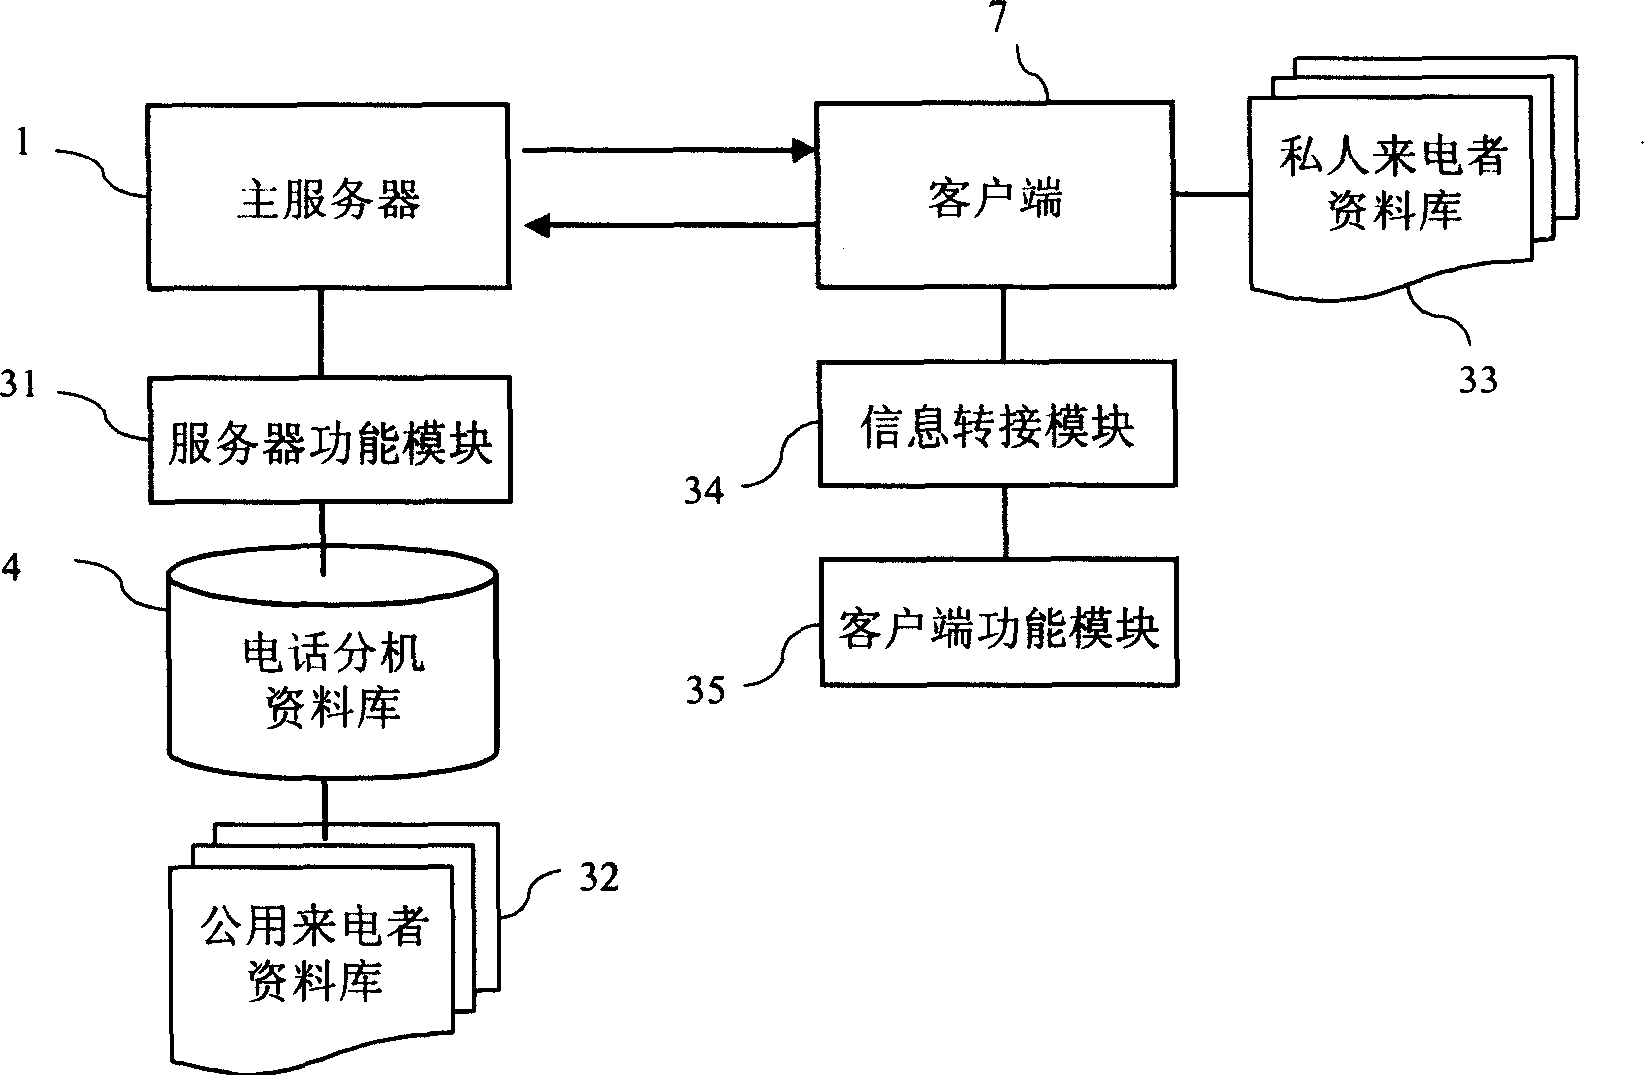 Automatic display method and system for incoming message switched by extension telephone